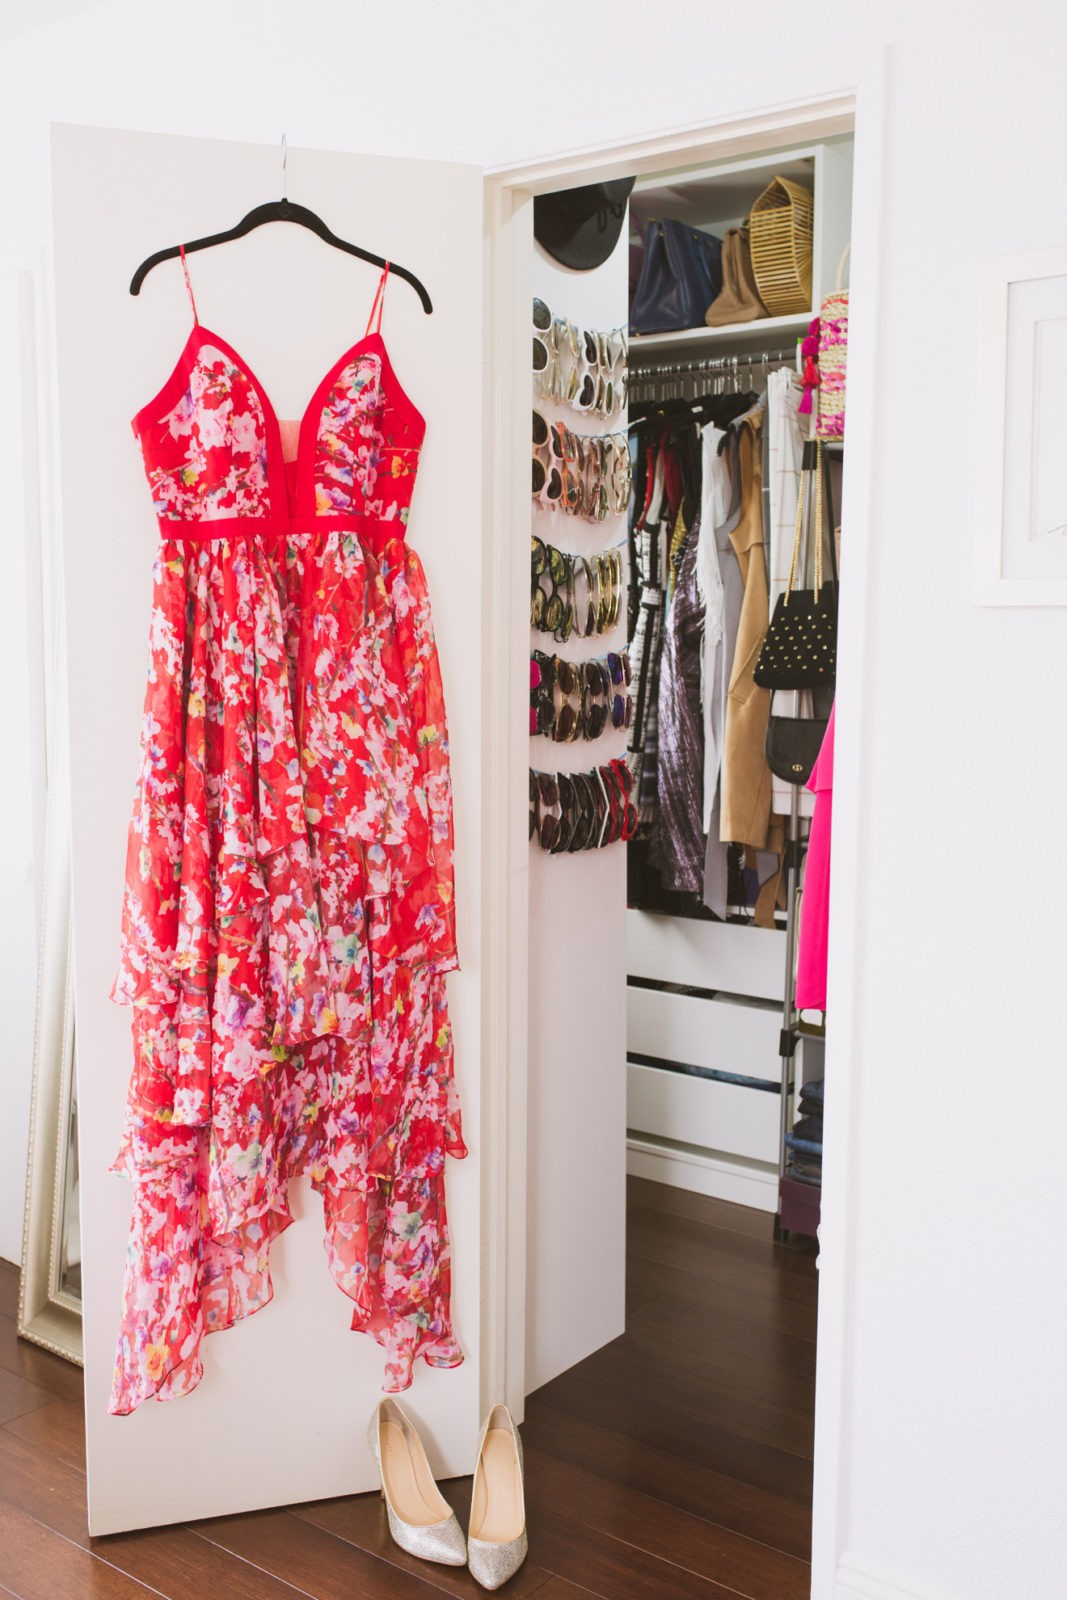 Tips for Tidying Up Your Home and Shopping Less,closet organization by Los Angeles Lifestyle Blogger Laura Lily | 5 Easy Ways to Improve Your Life Right Now by popular Los Angeles life and style blogger Laura Lily: image of a red floral dress hanging on a closet door.